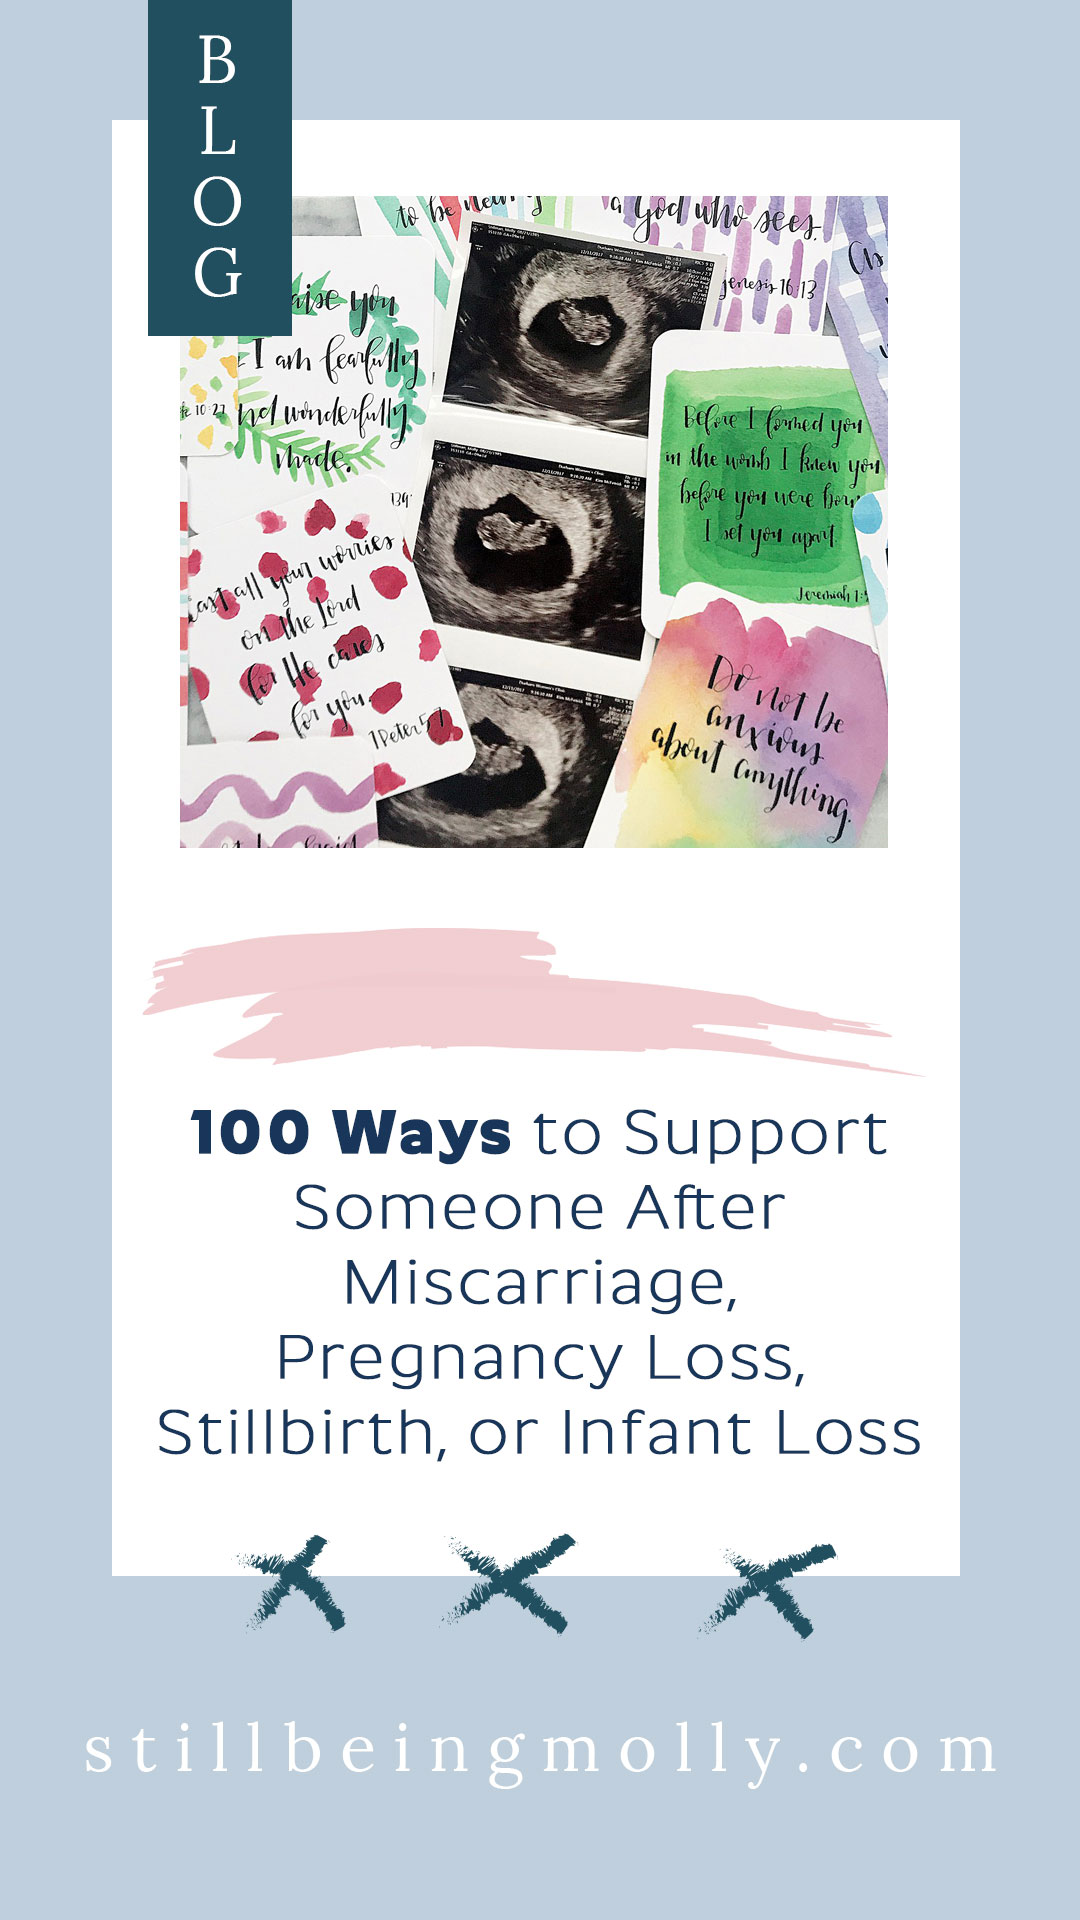 100 Ways to Support Someone After Miscarriage, Pregnancy Loss, Stillbirth, or Infant Loss